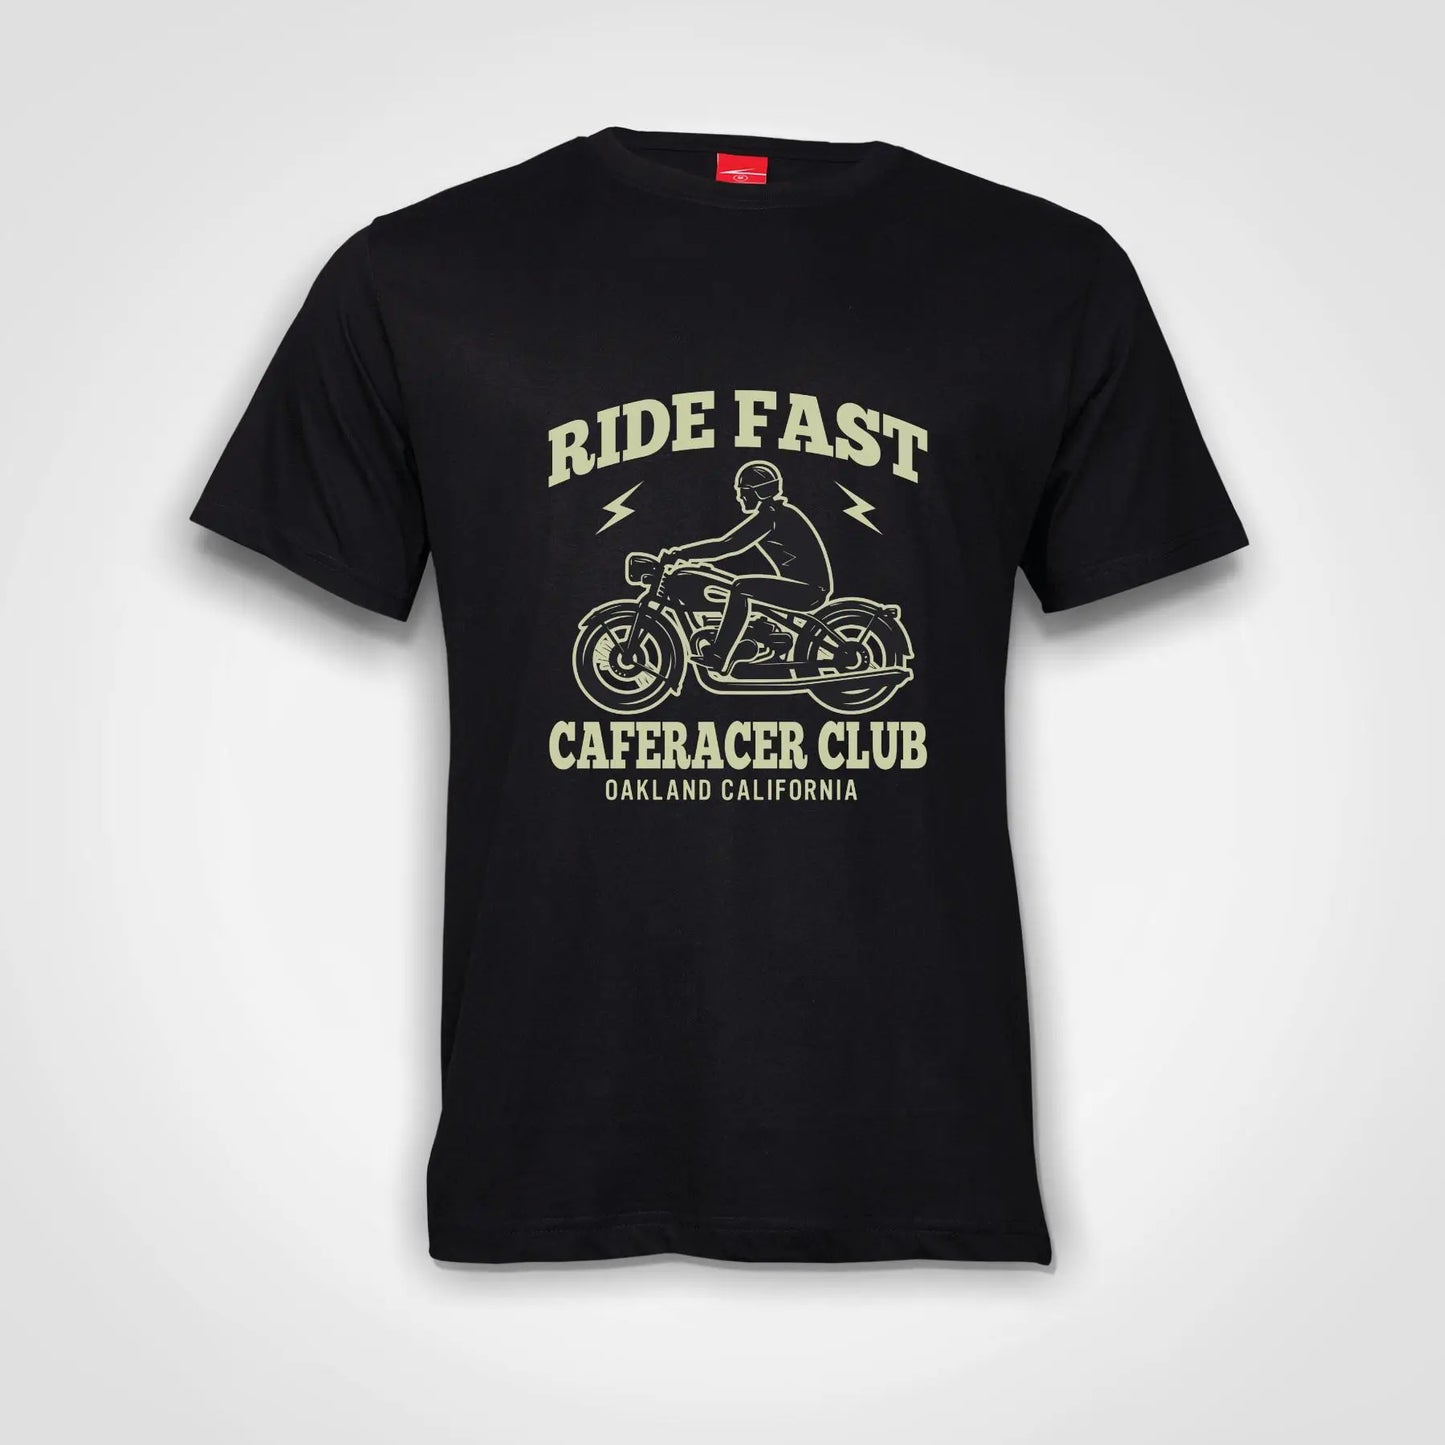 Ride Fast CafeRacer Club Cotton T-Shirt Black IZZIT APPAREL